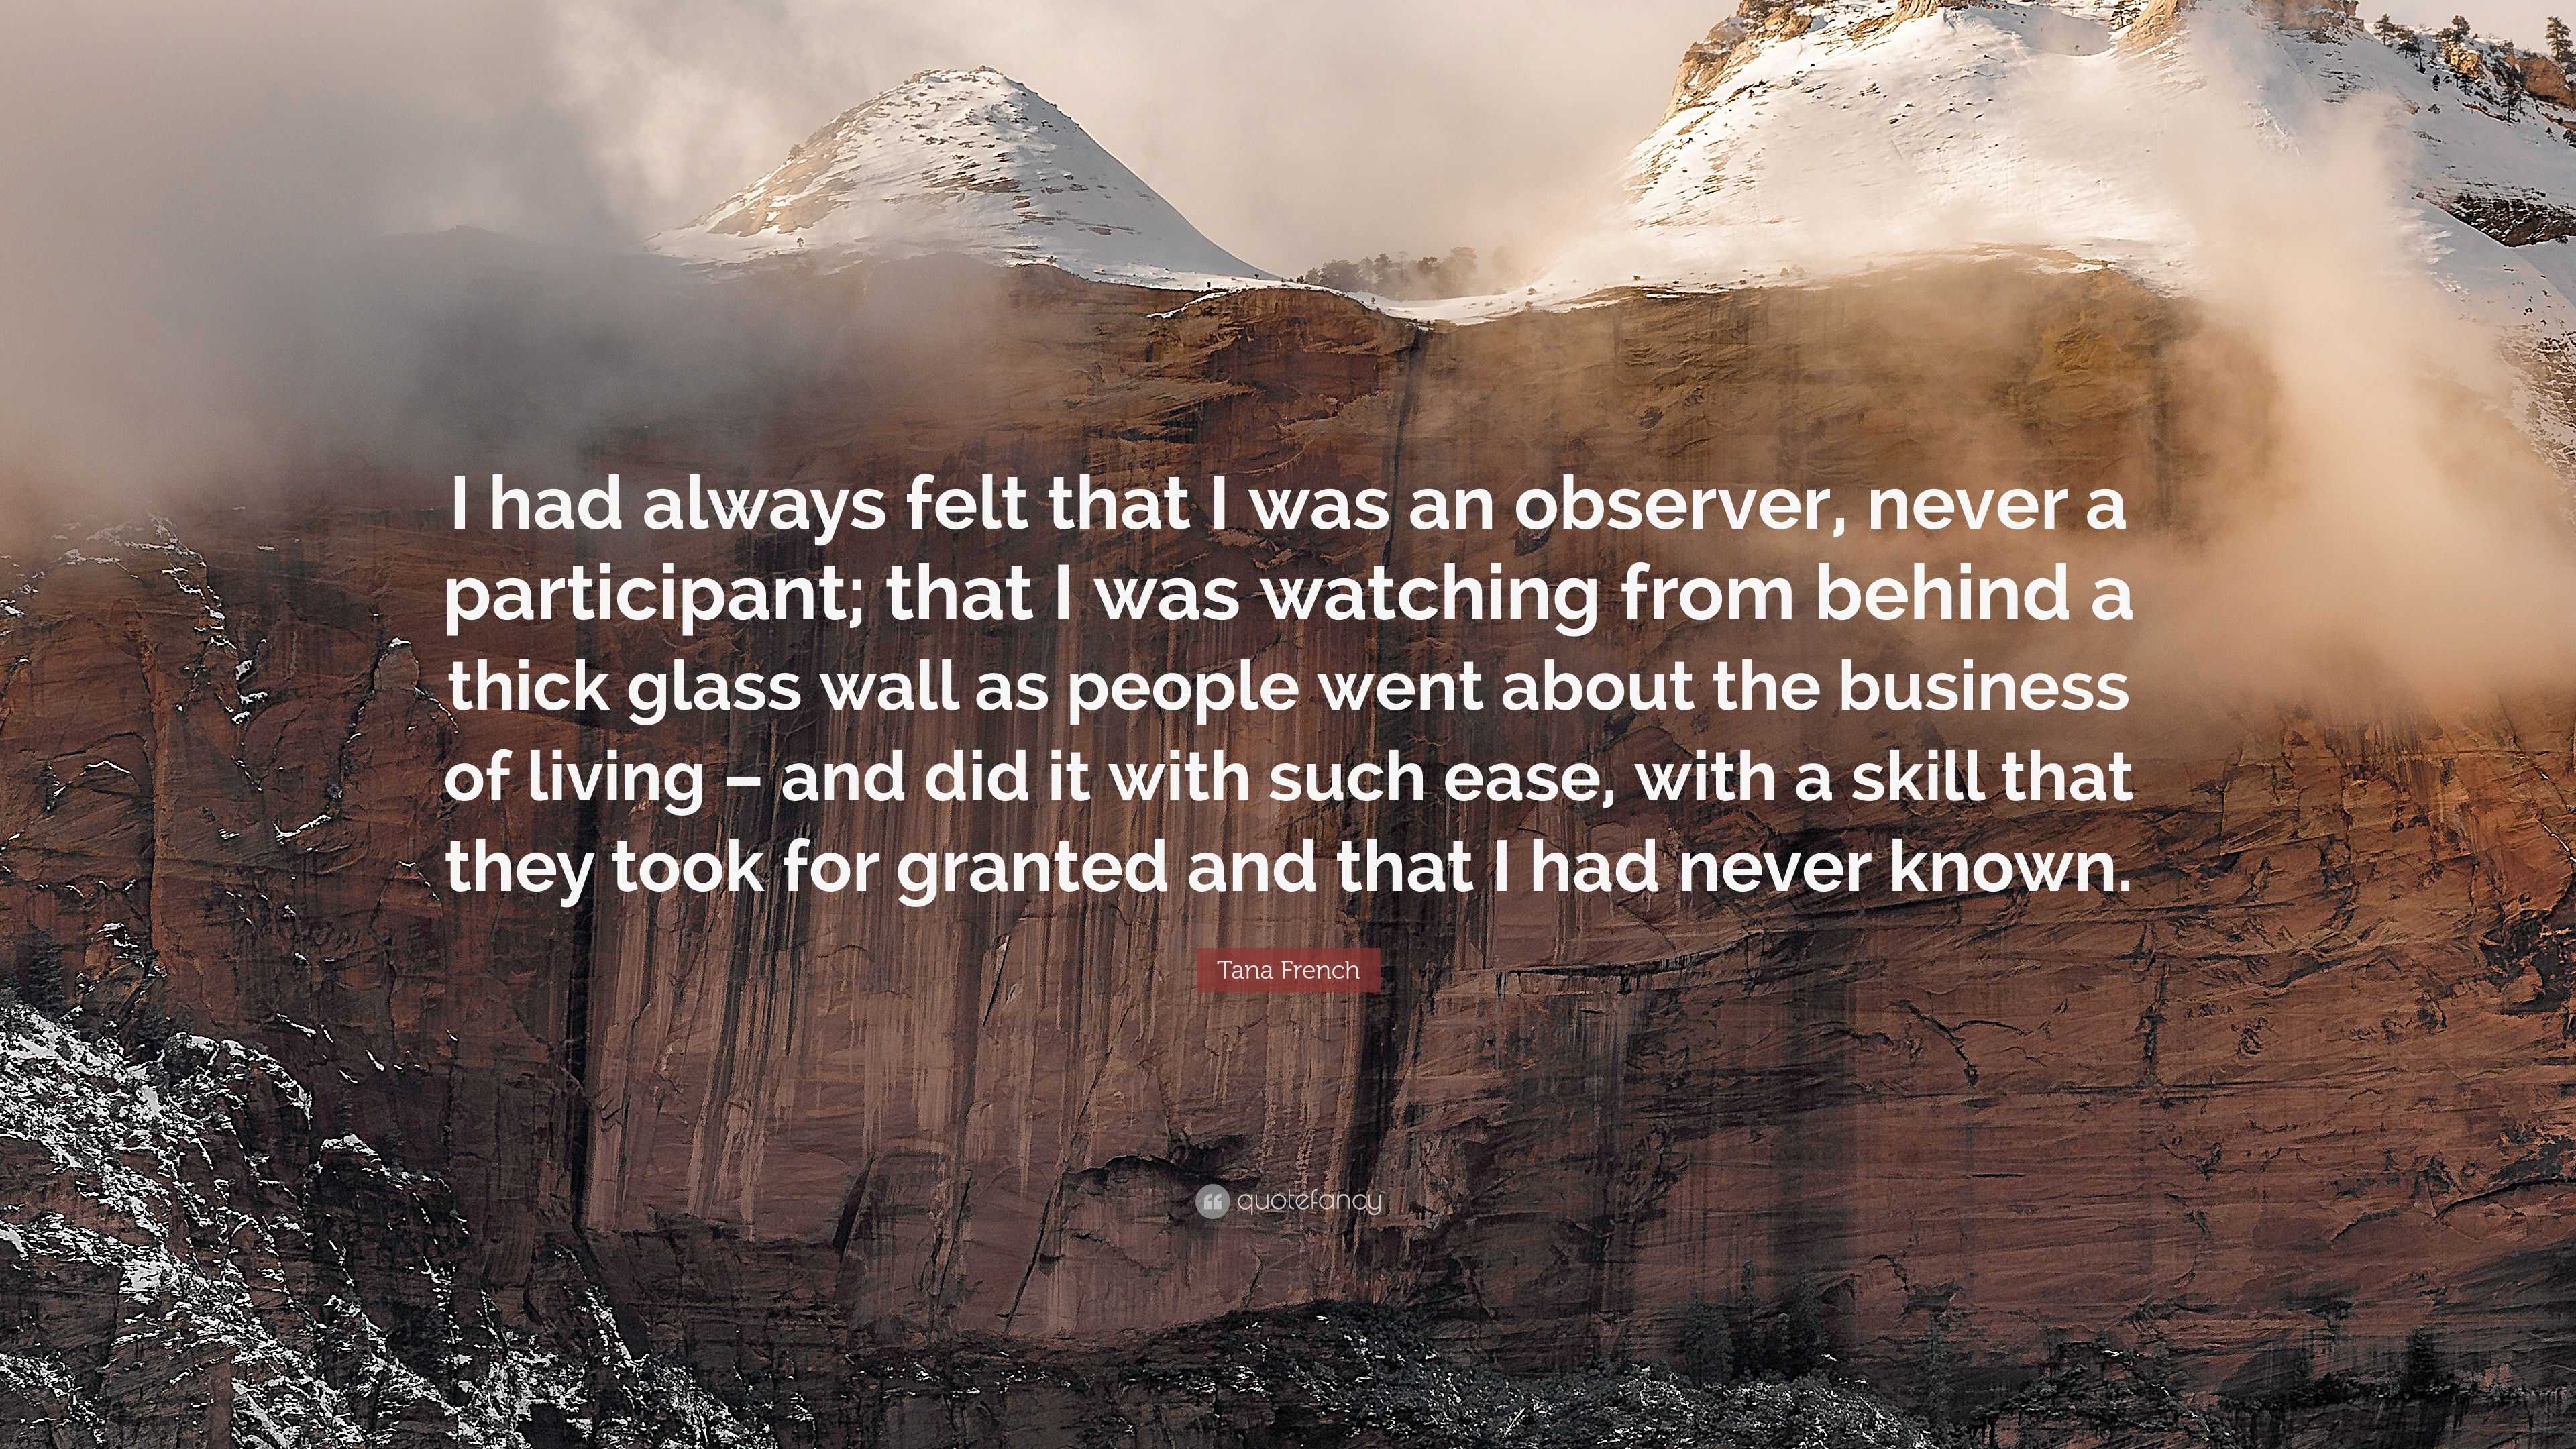 Tana French Quote: “I had always felt that I was an observer